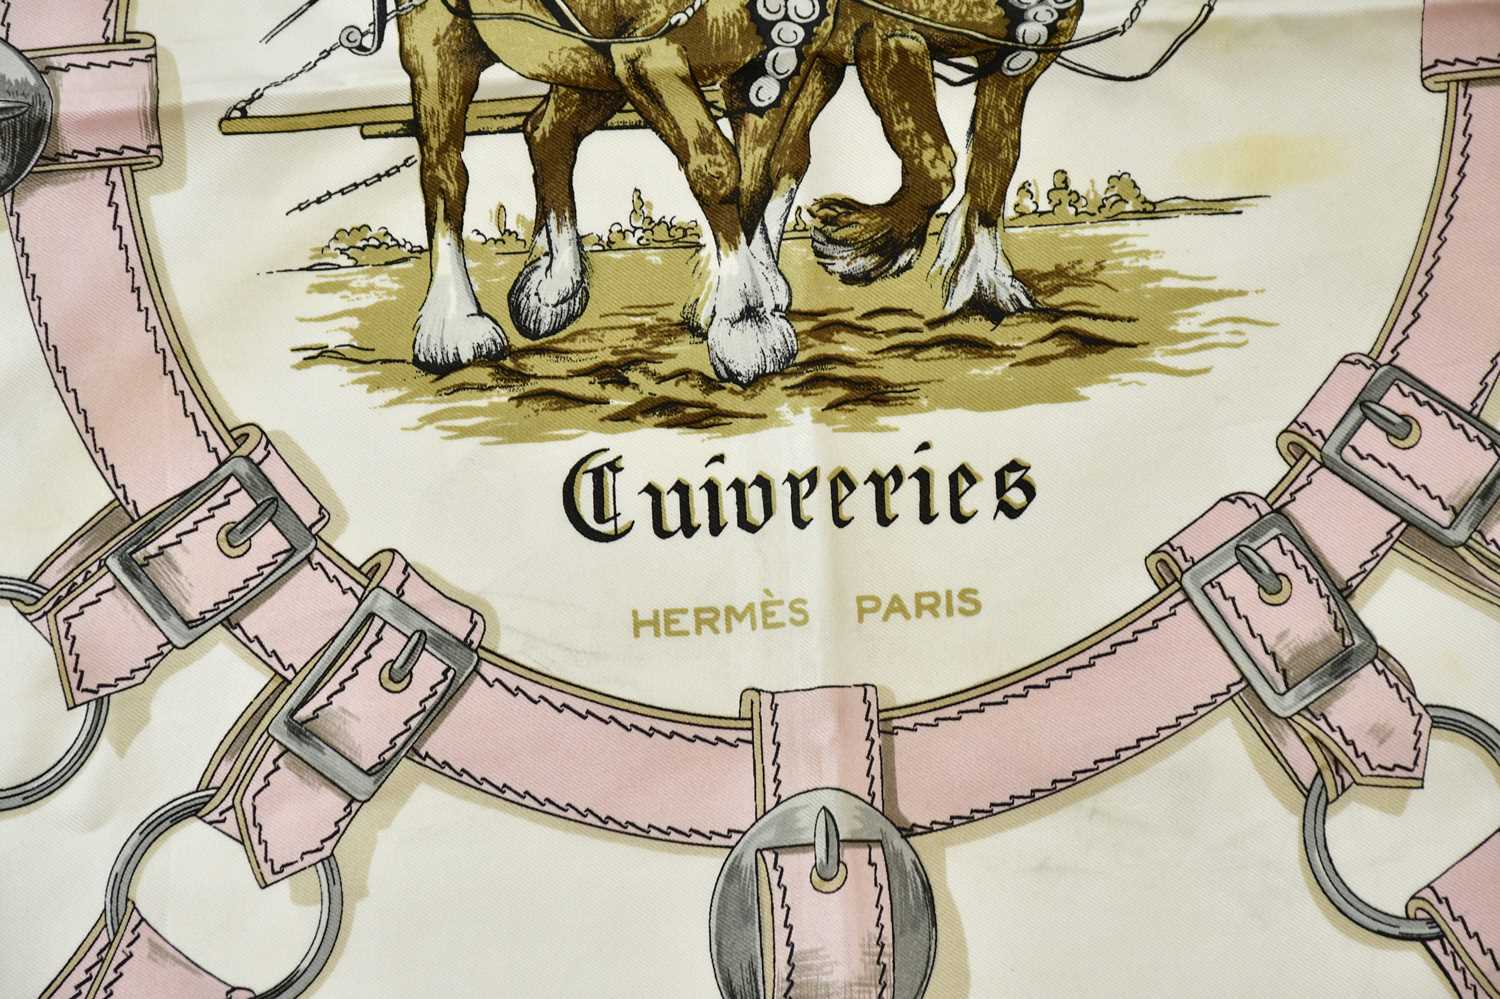 HERMÈS; a 100% silk Cuivreries scarf, in beige, pink and silver, designed and signed by F. de la - Image 2 of 2